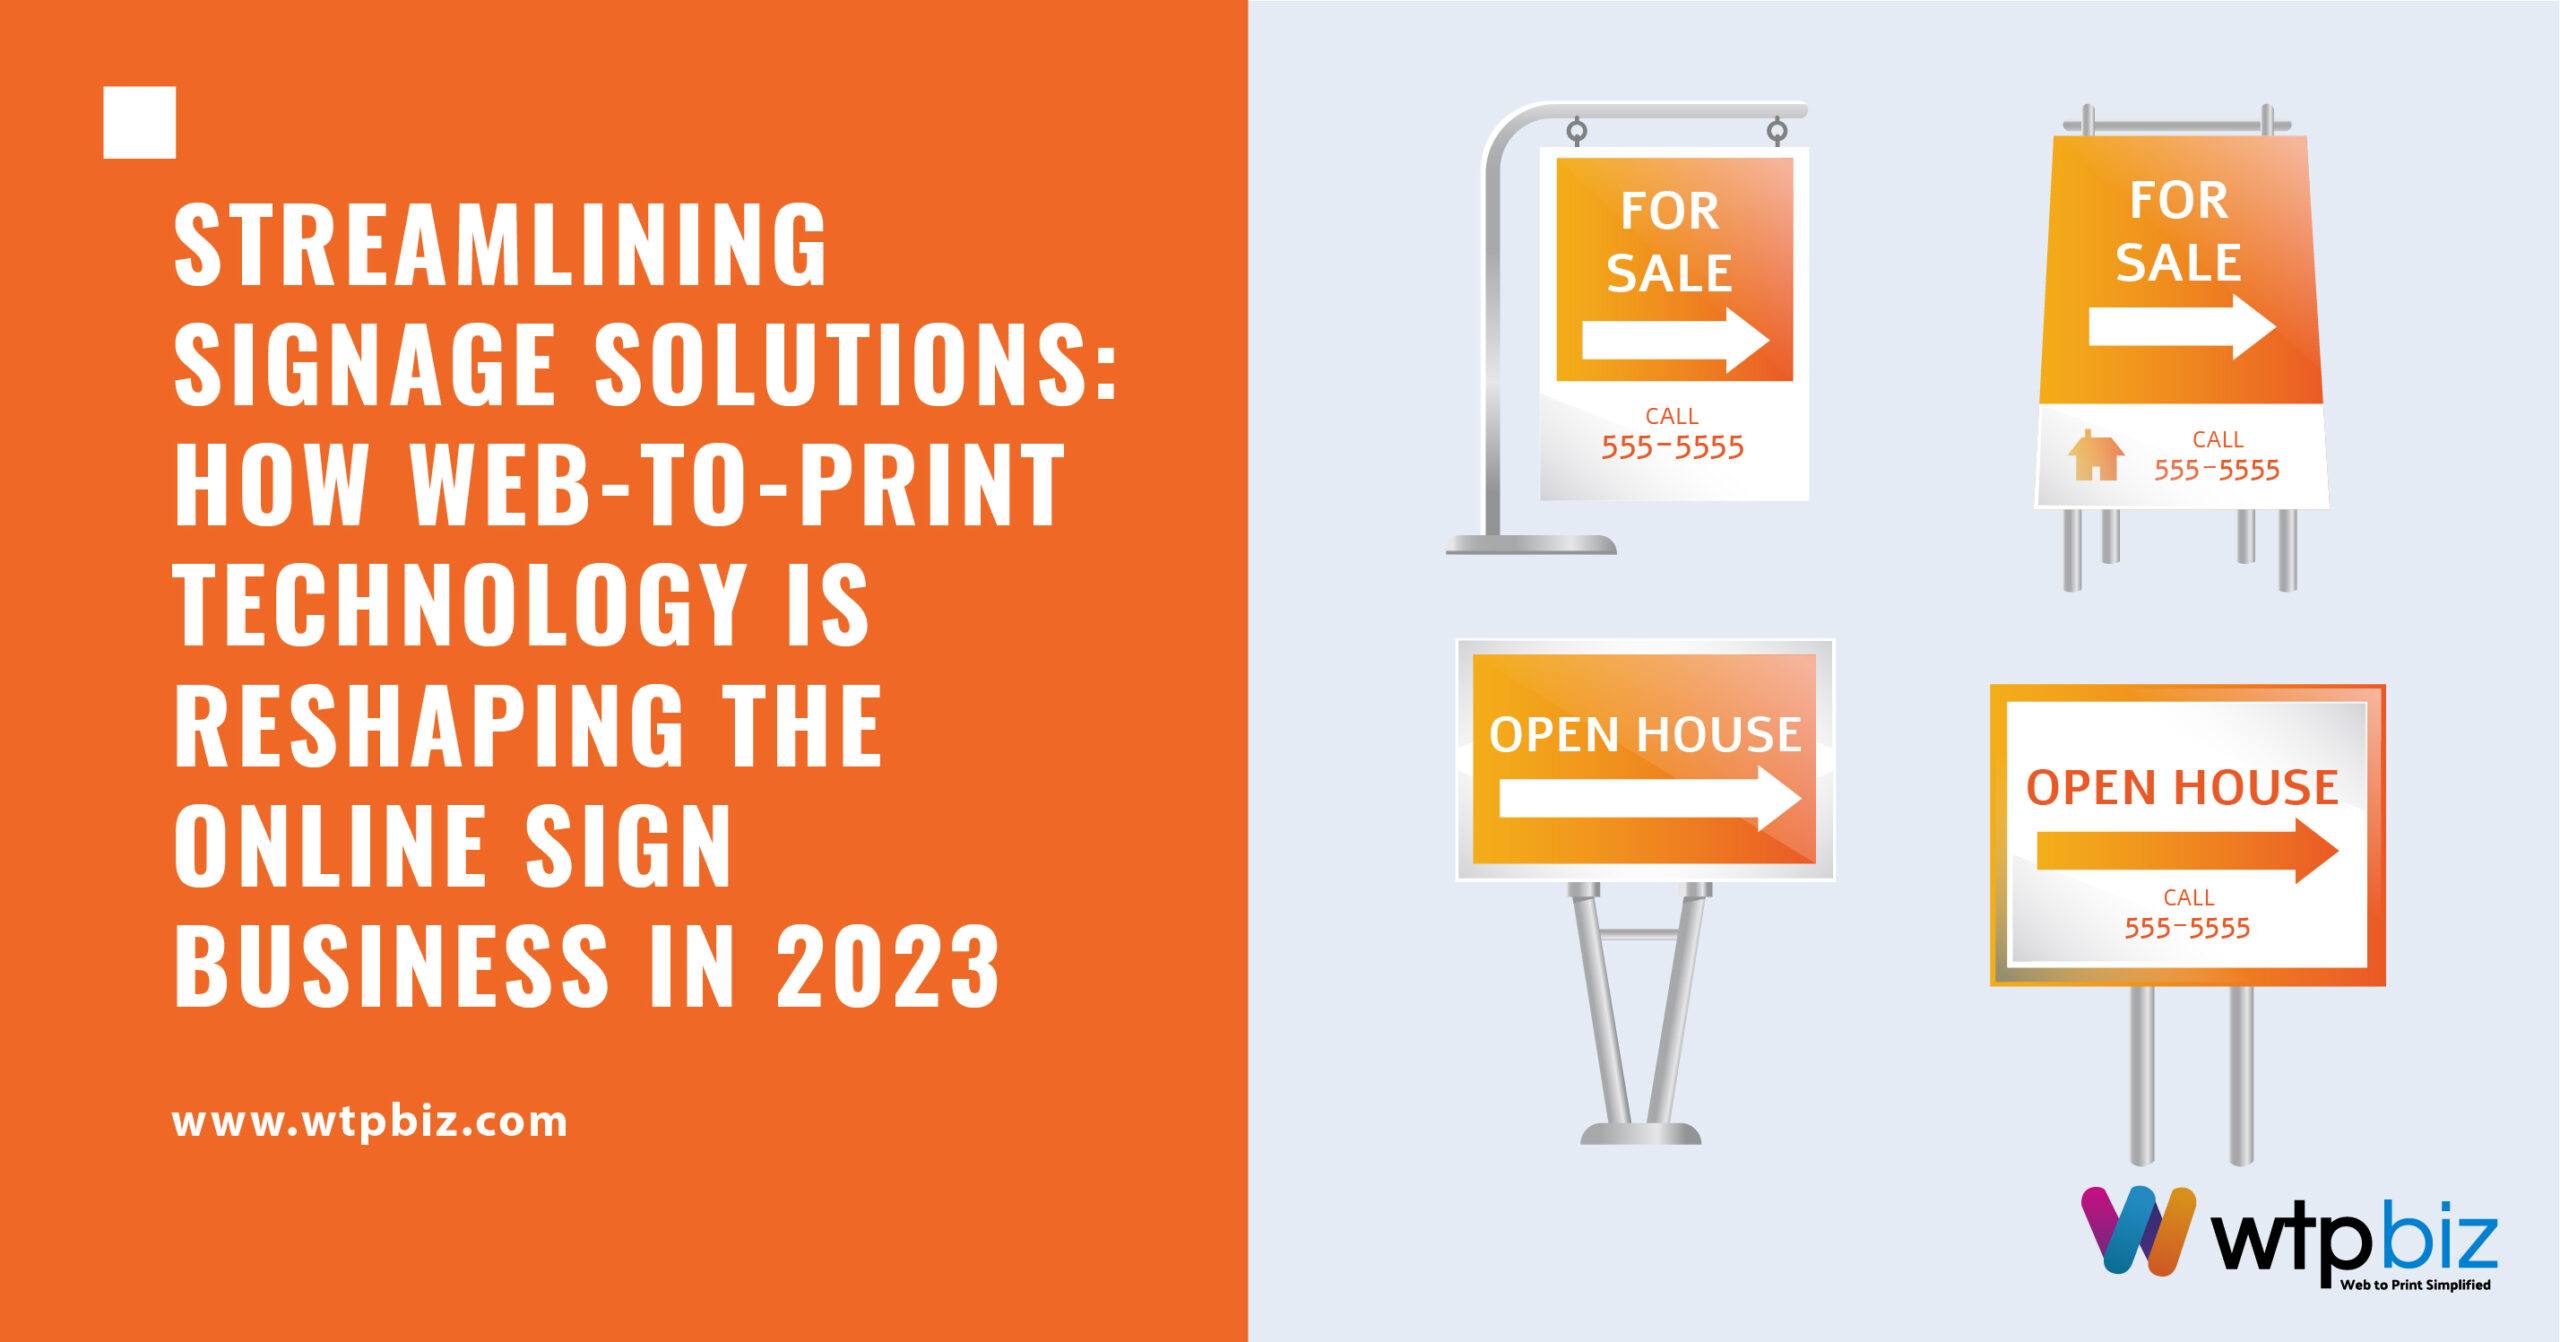 How Web-to-Print Technology is Reshaping the Online Sign Business in 2023